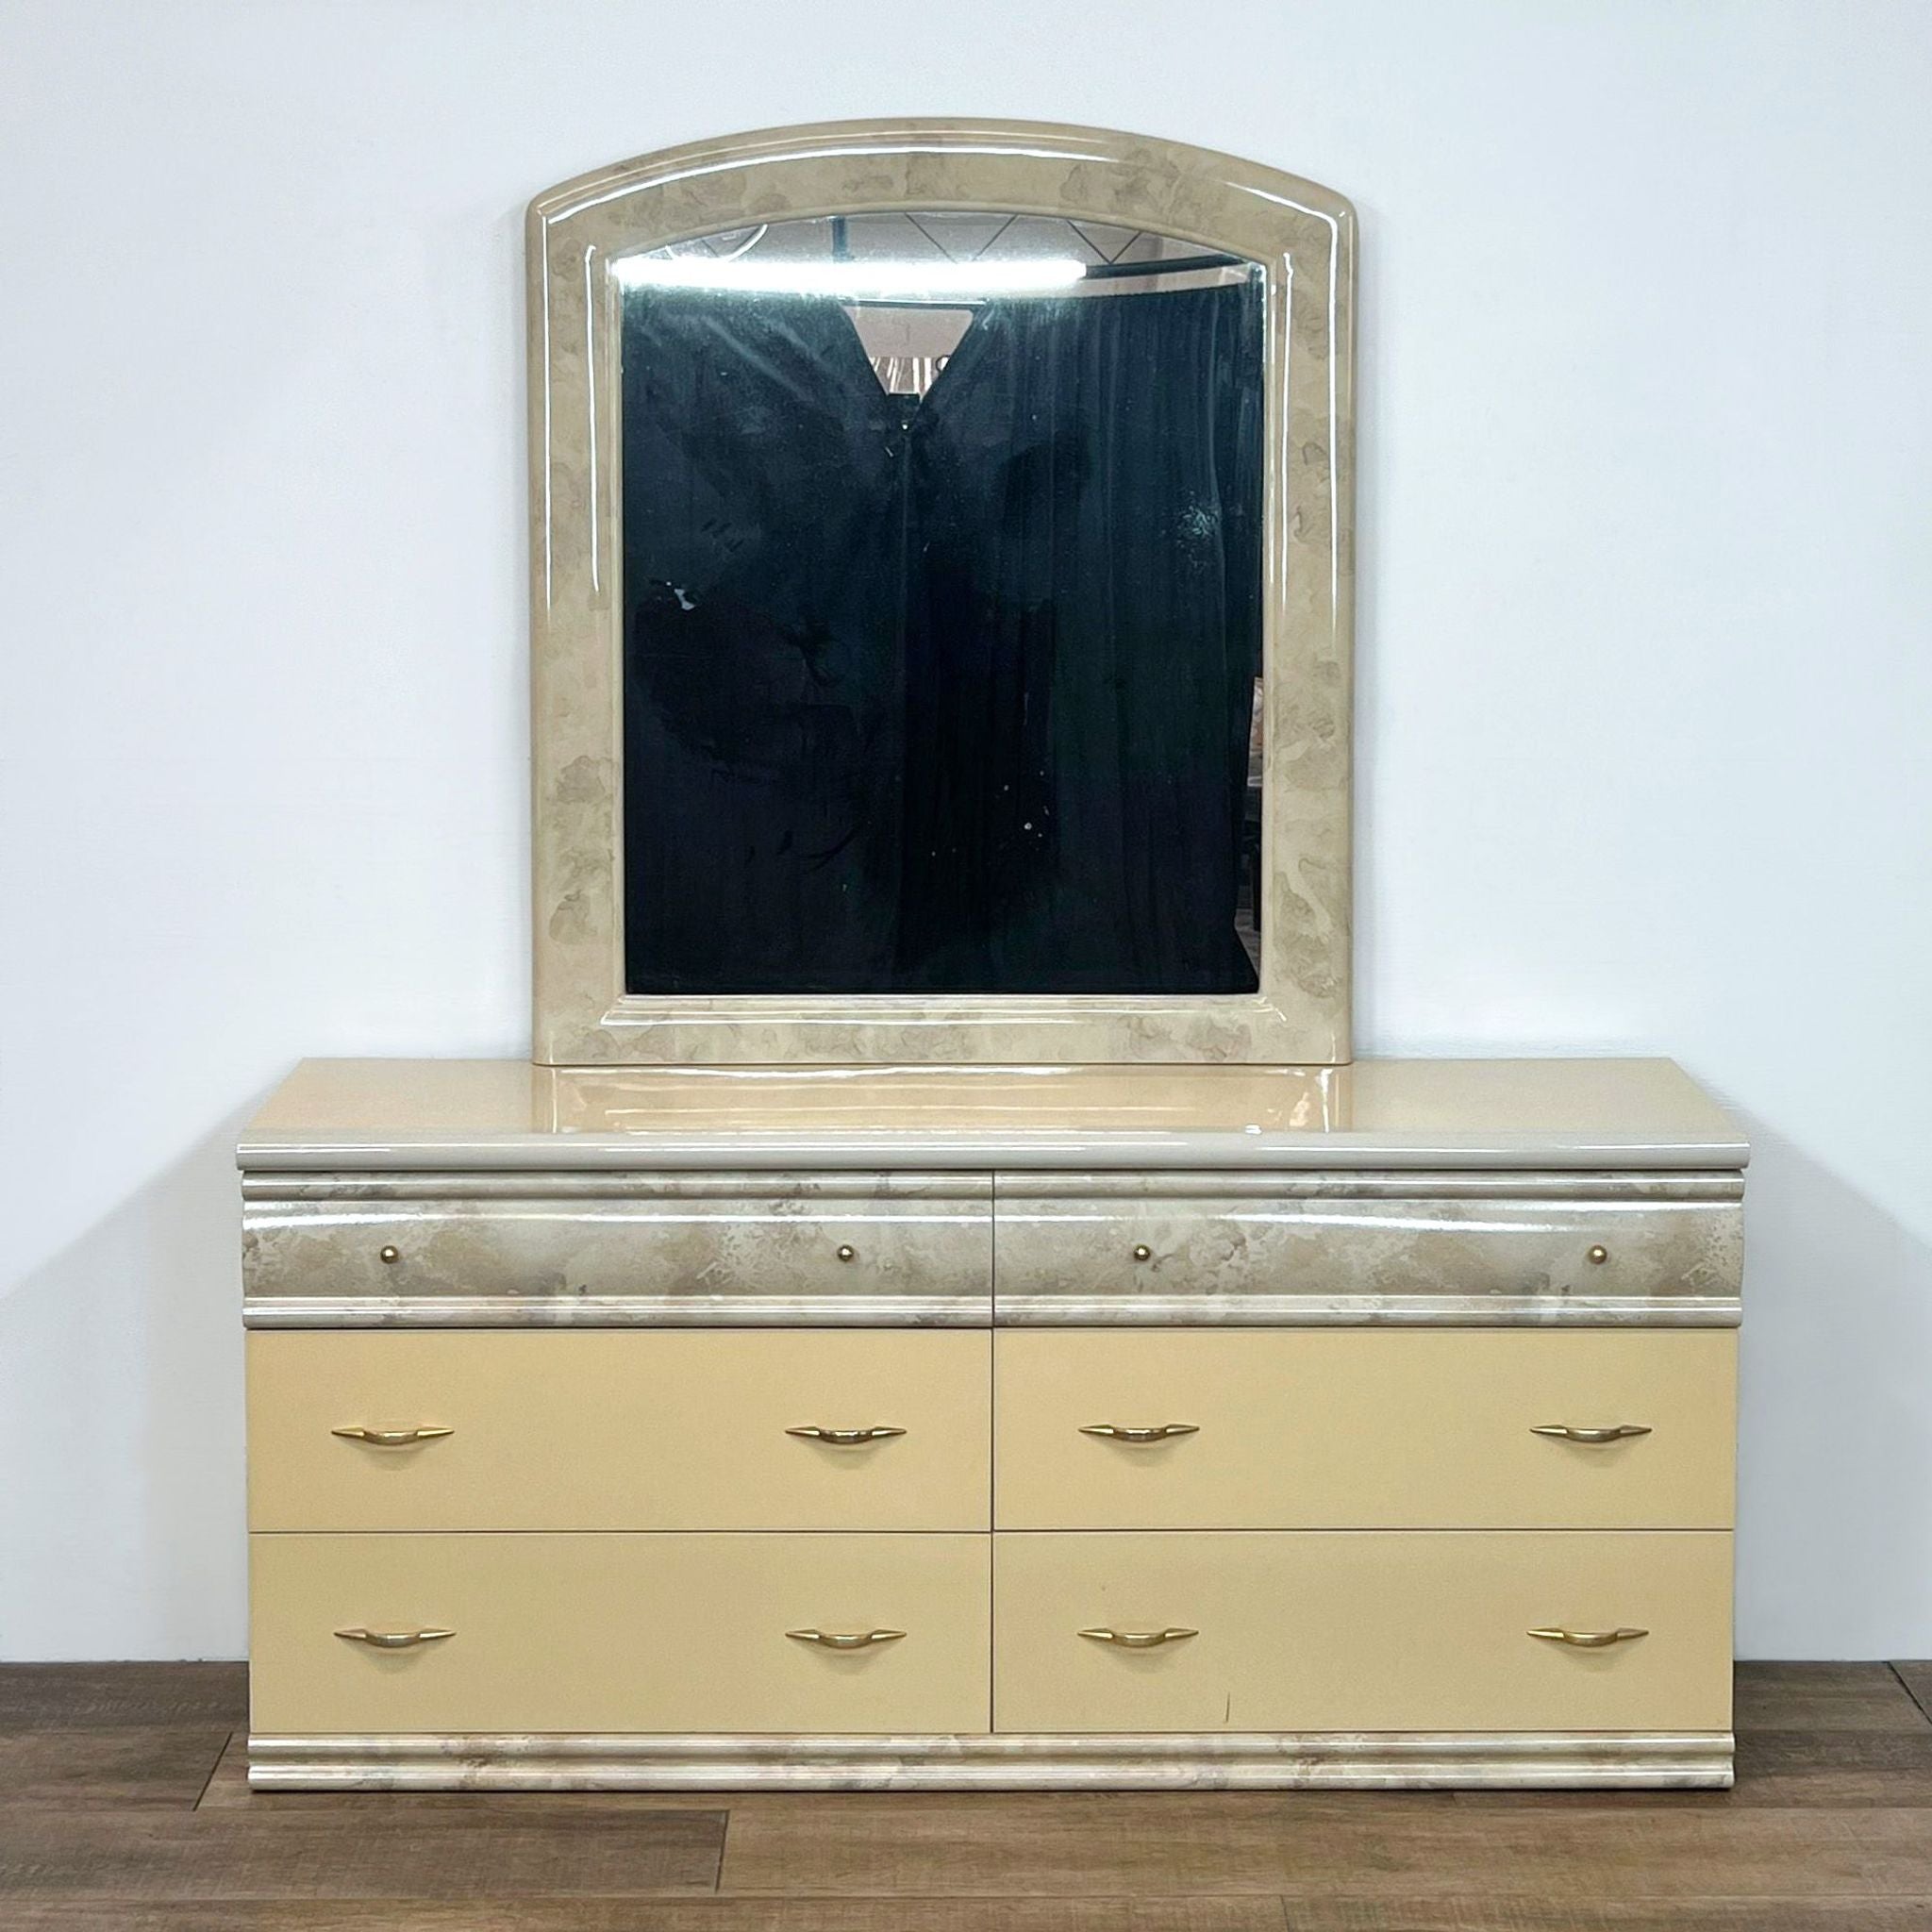 Italian Reperch 6-drawer cream dresser with faux marble top and arched vanity mirror, featuring gold handles.